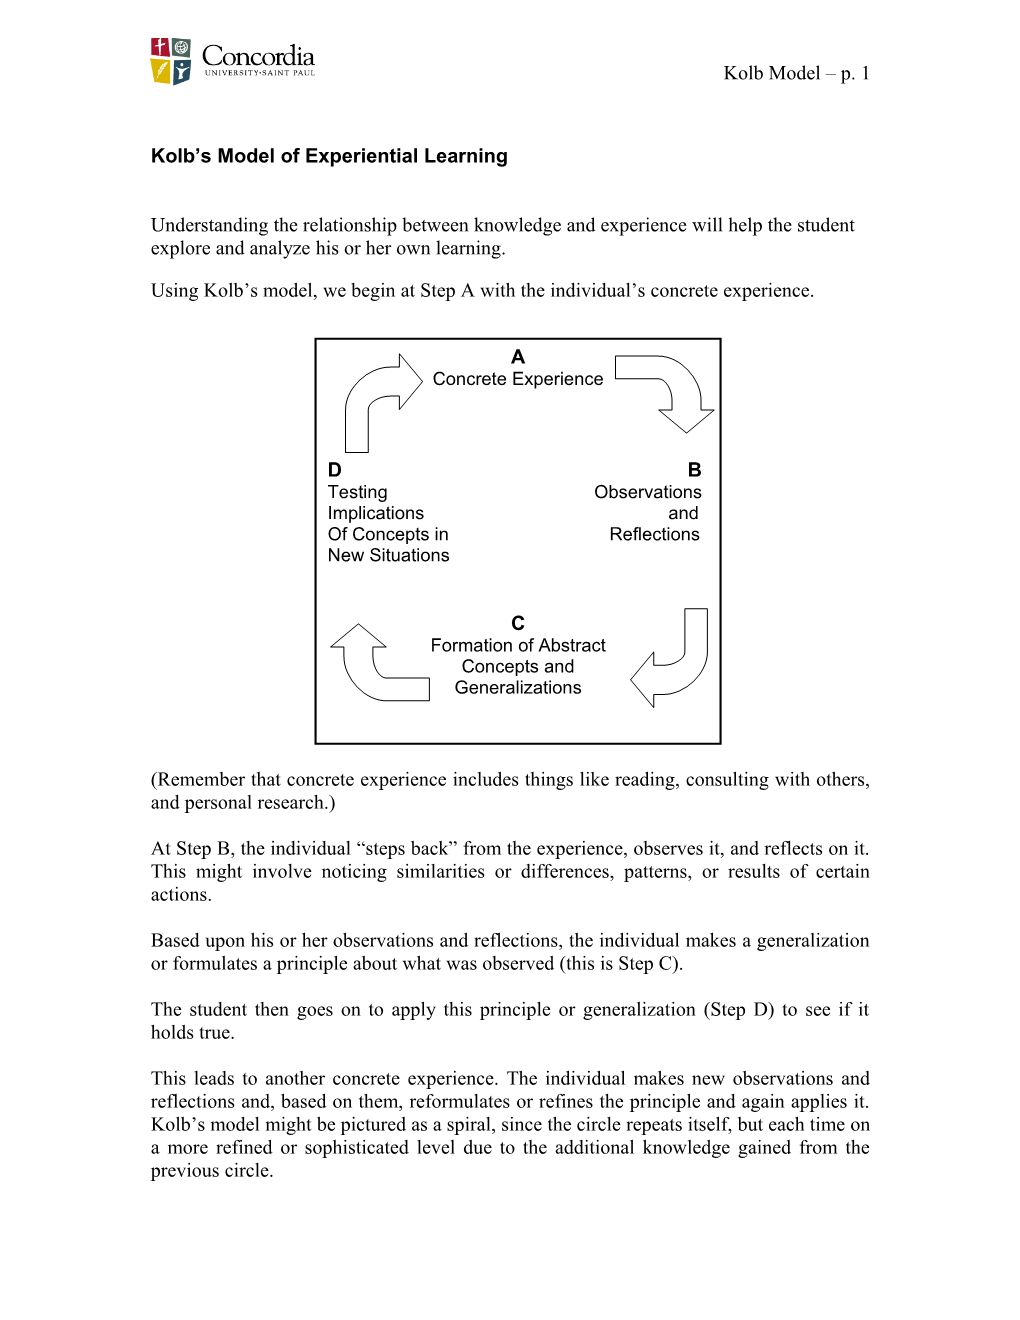 Kolb S Model of Experiential Learning